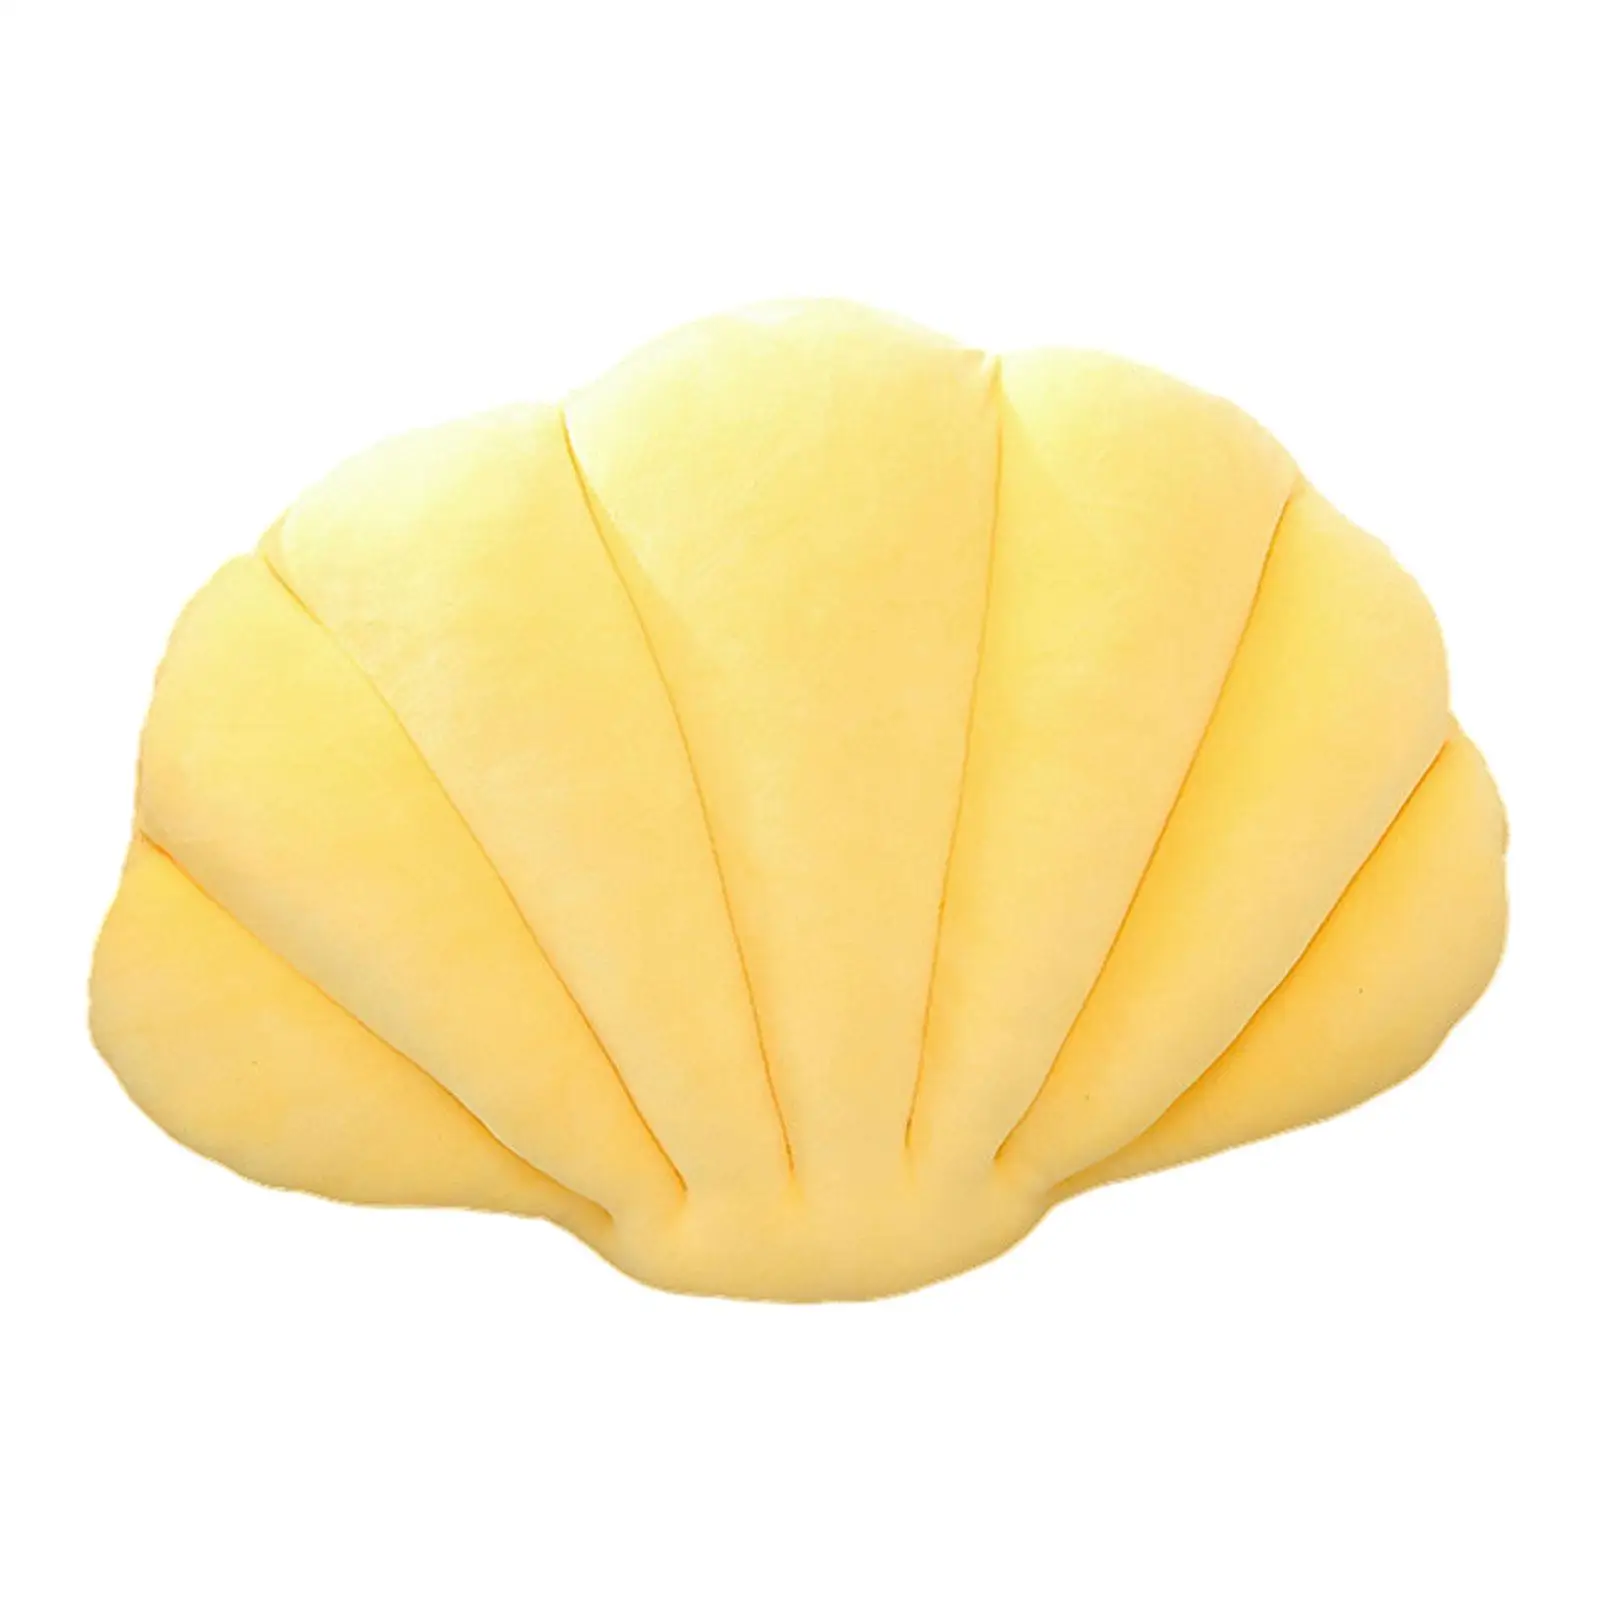 Shell Shaped Pillows Plush Pillow Ornament Multifunctional Cute Soft Floor Cushion for Office Couch Bedroom Bed Birthday Gifts